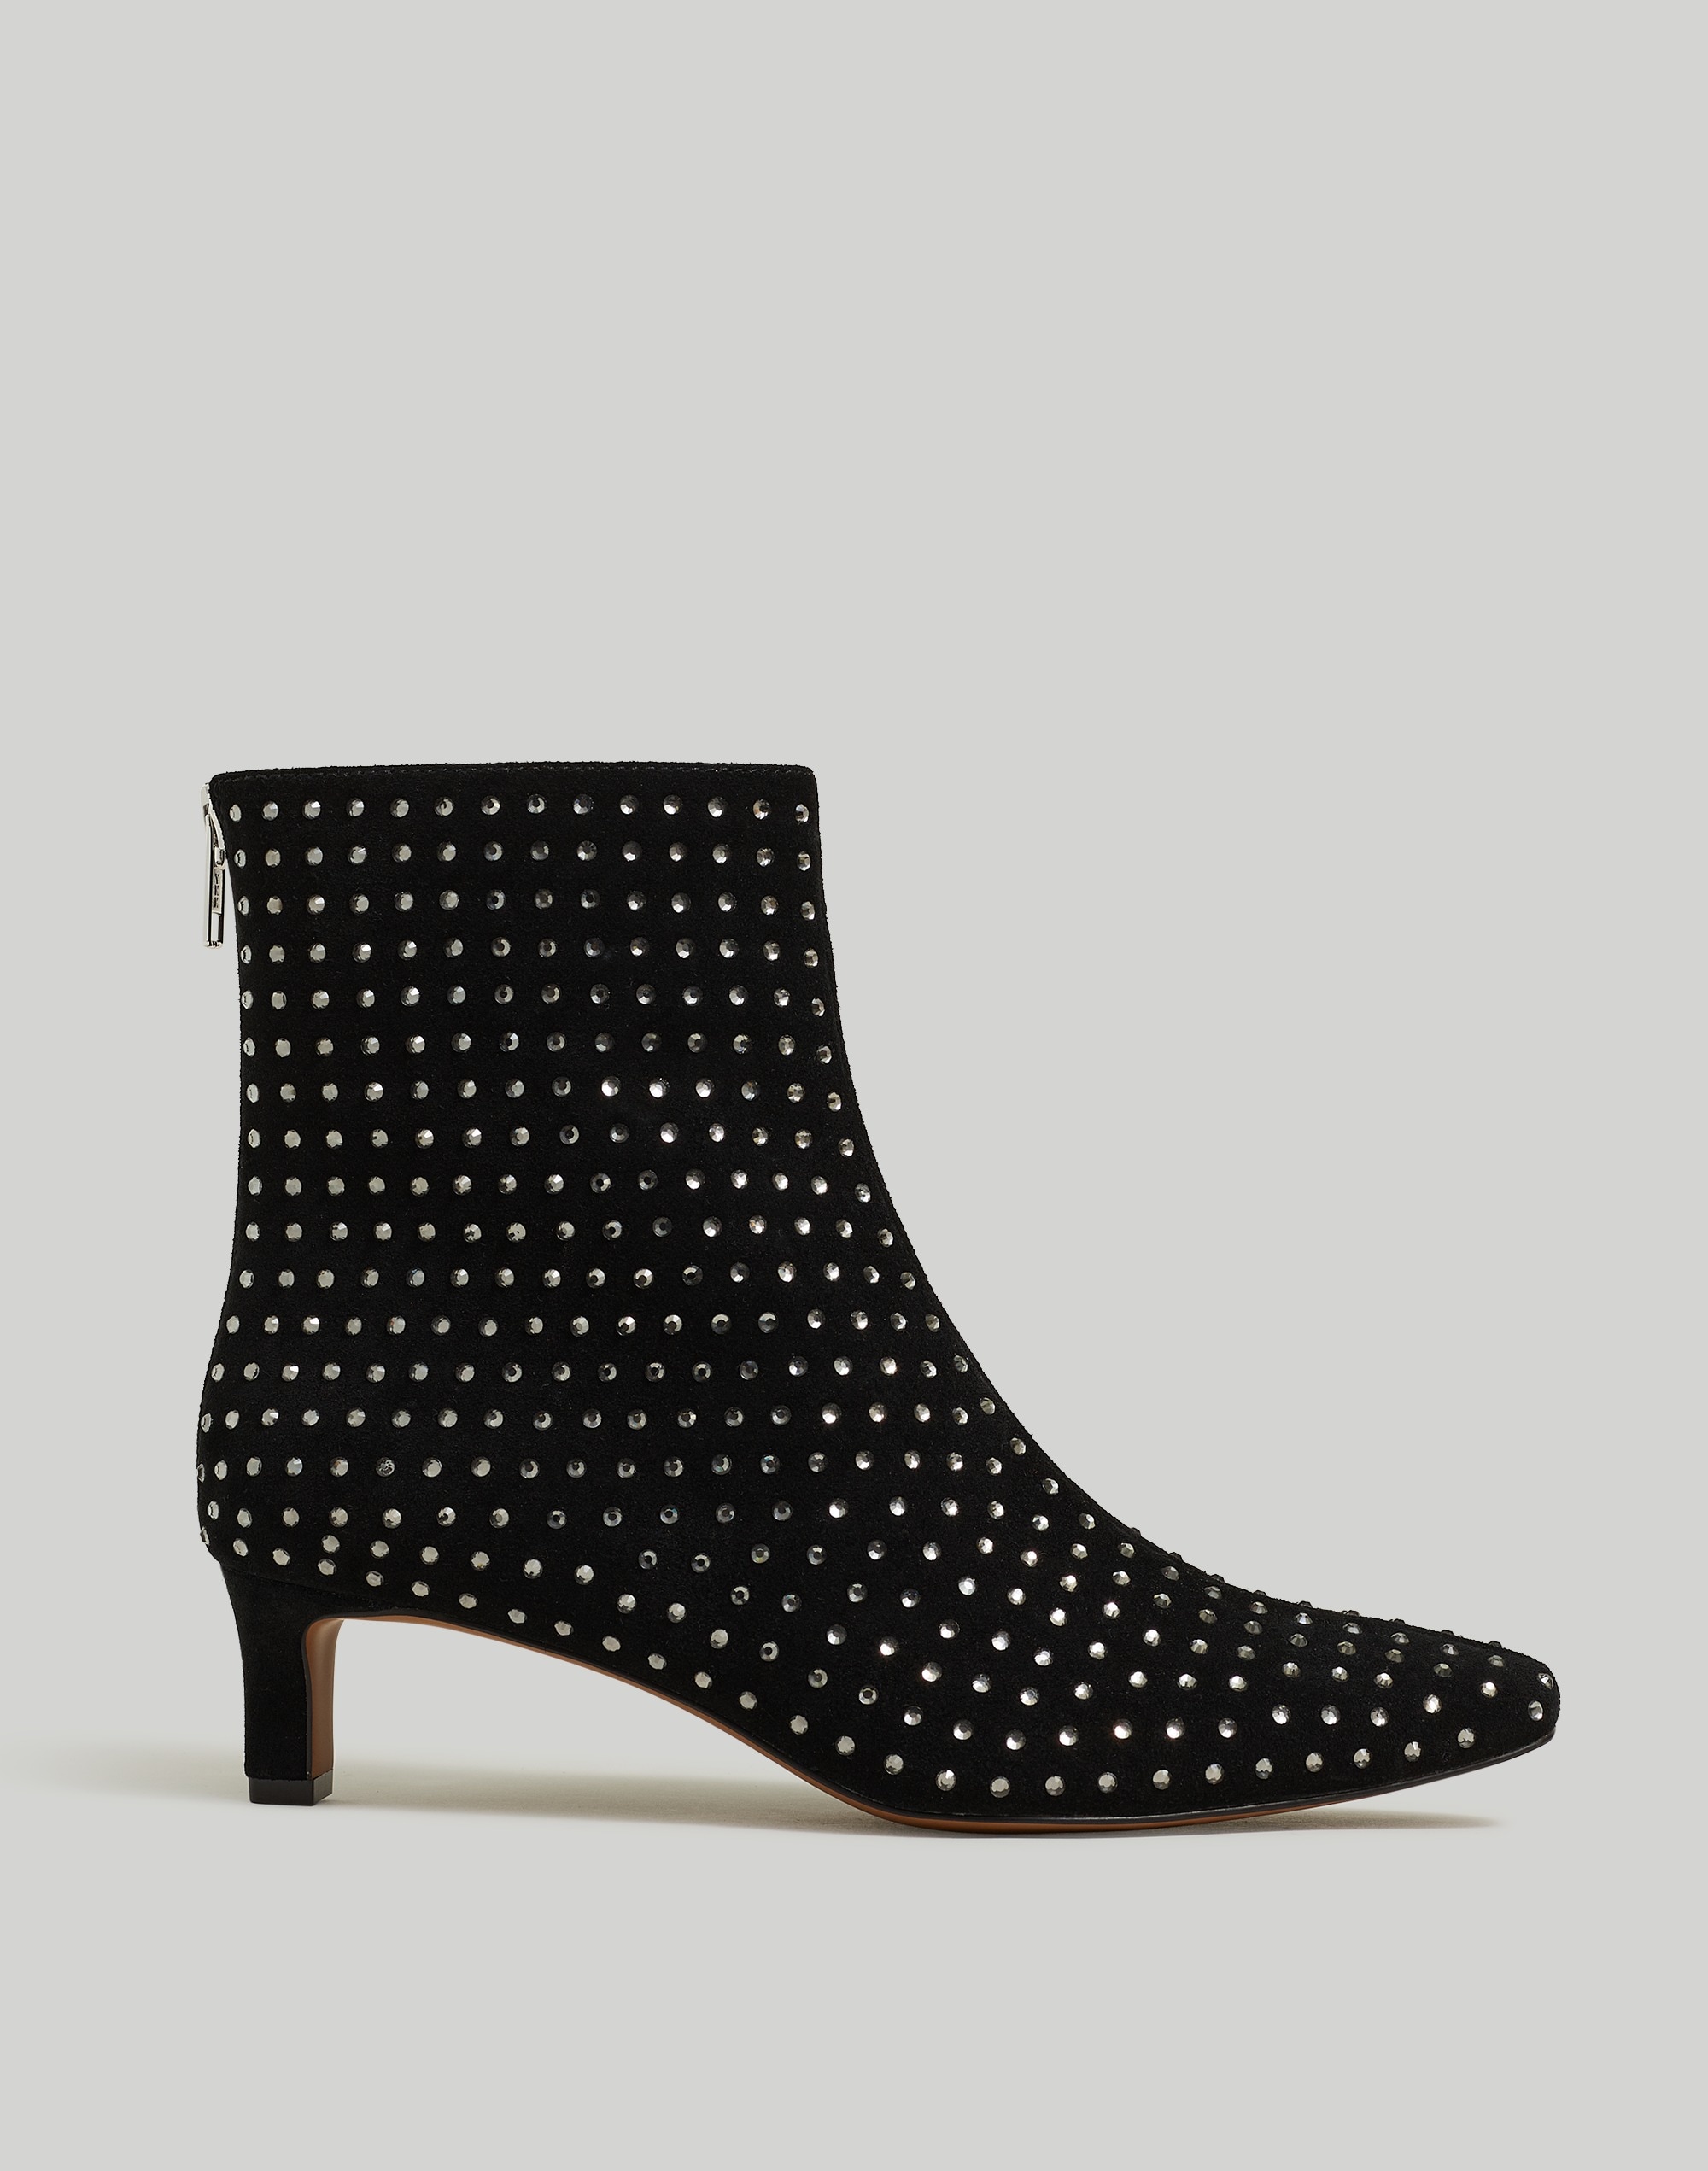 The Dimes Kitten-Heel Boot Crystal-Embellished Suede